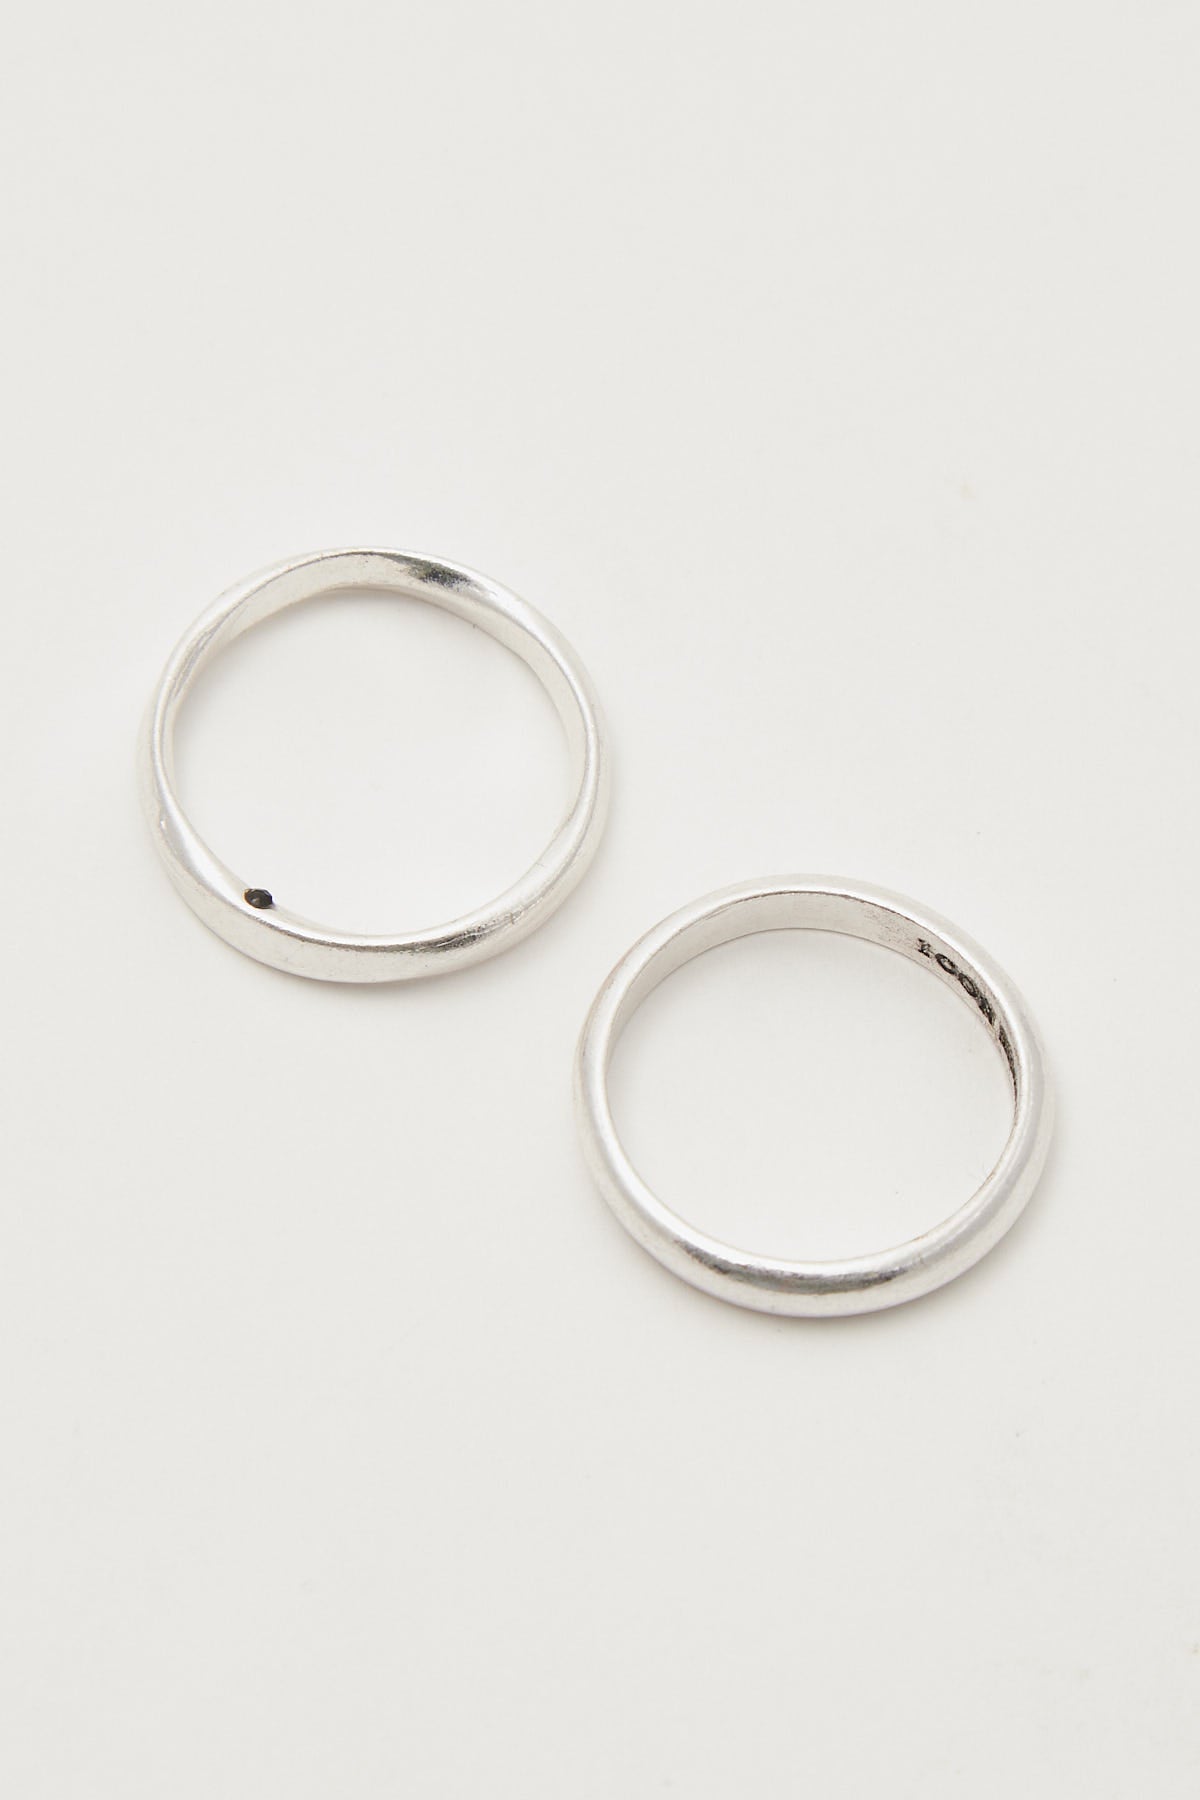 Icon Brand Re-Cast Double Ring Band Silver